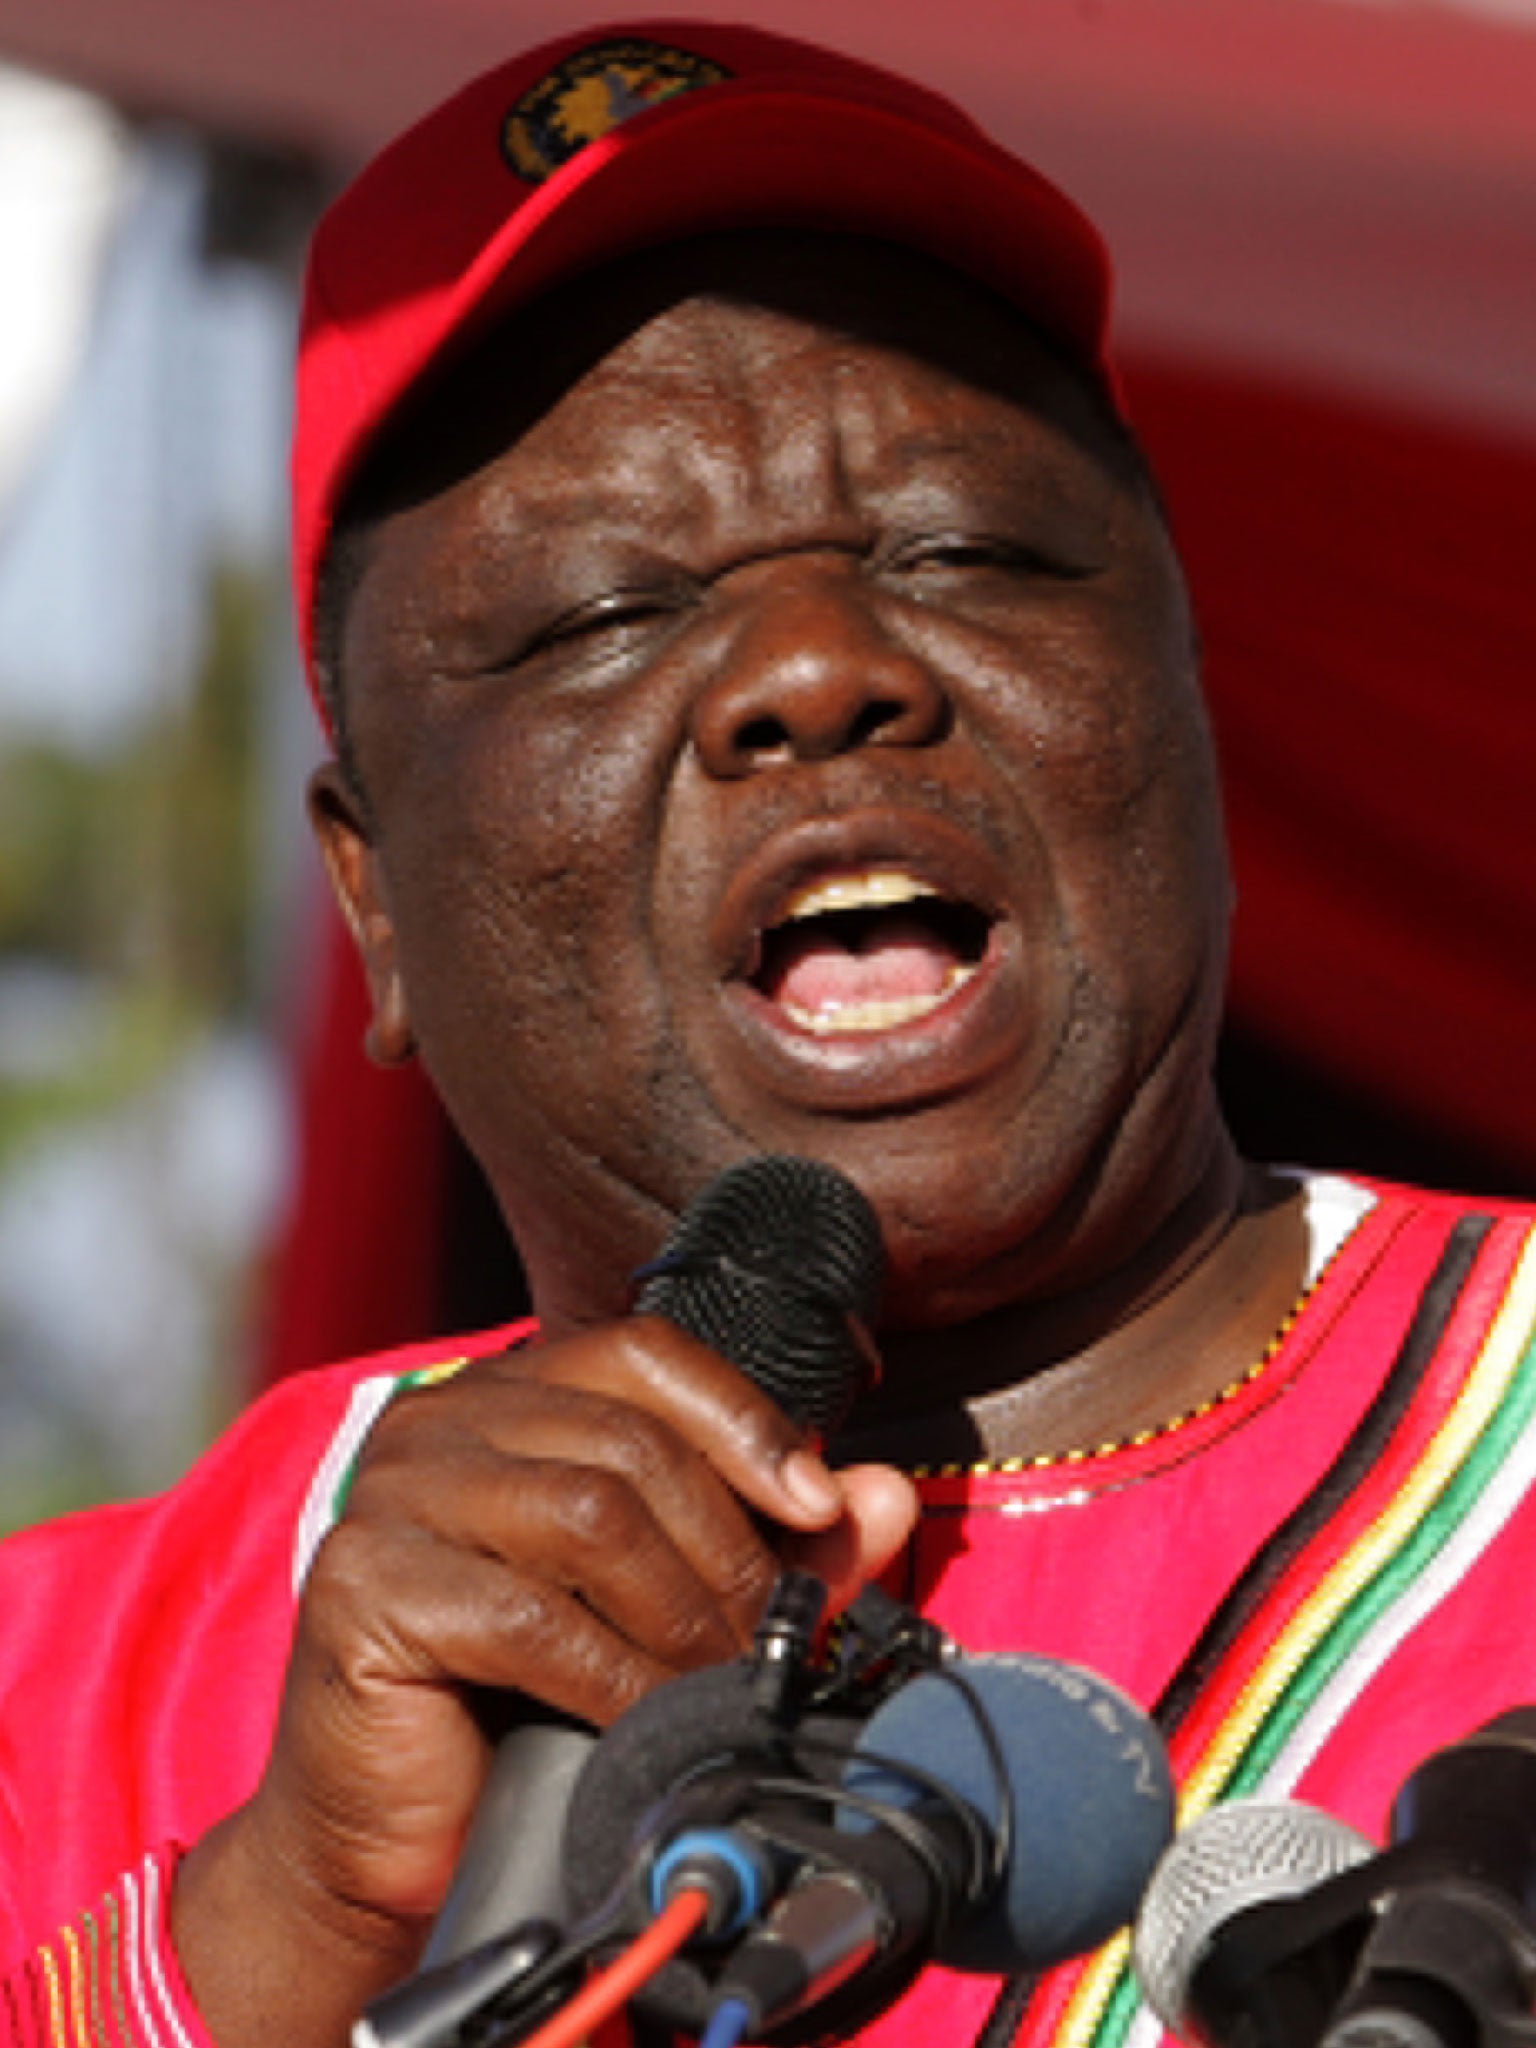 Speaking at a gathering to kick off his party’s campaign, Prime Minister Morgan Tsvangirai said he has had to bow to pressure for an early vote